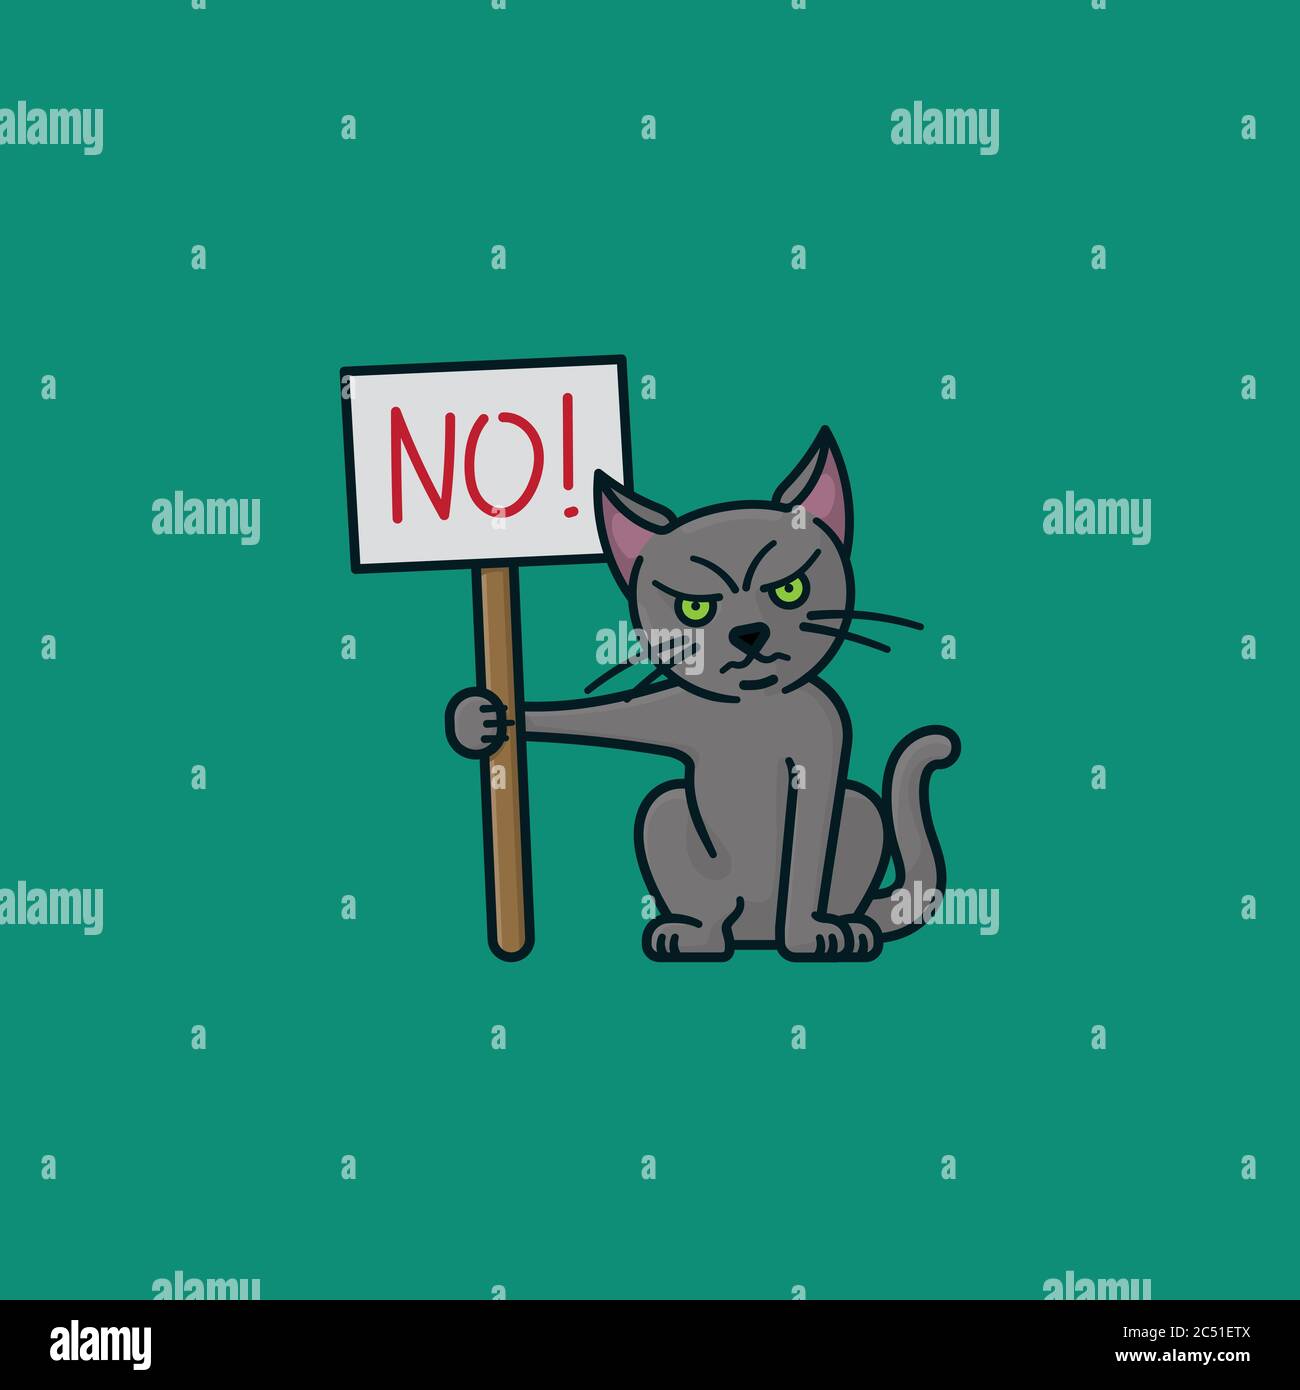 Cartoon cat character with protest sign vector illustration for Disobedience Day on July 3rd. Stock Vector